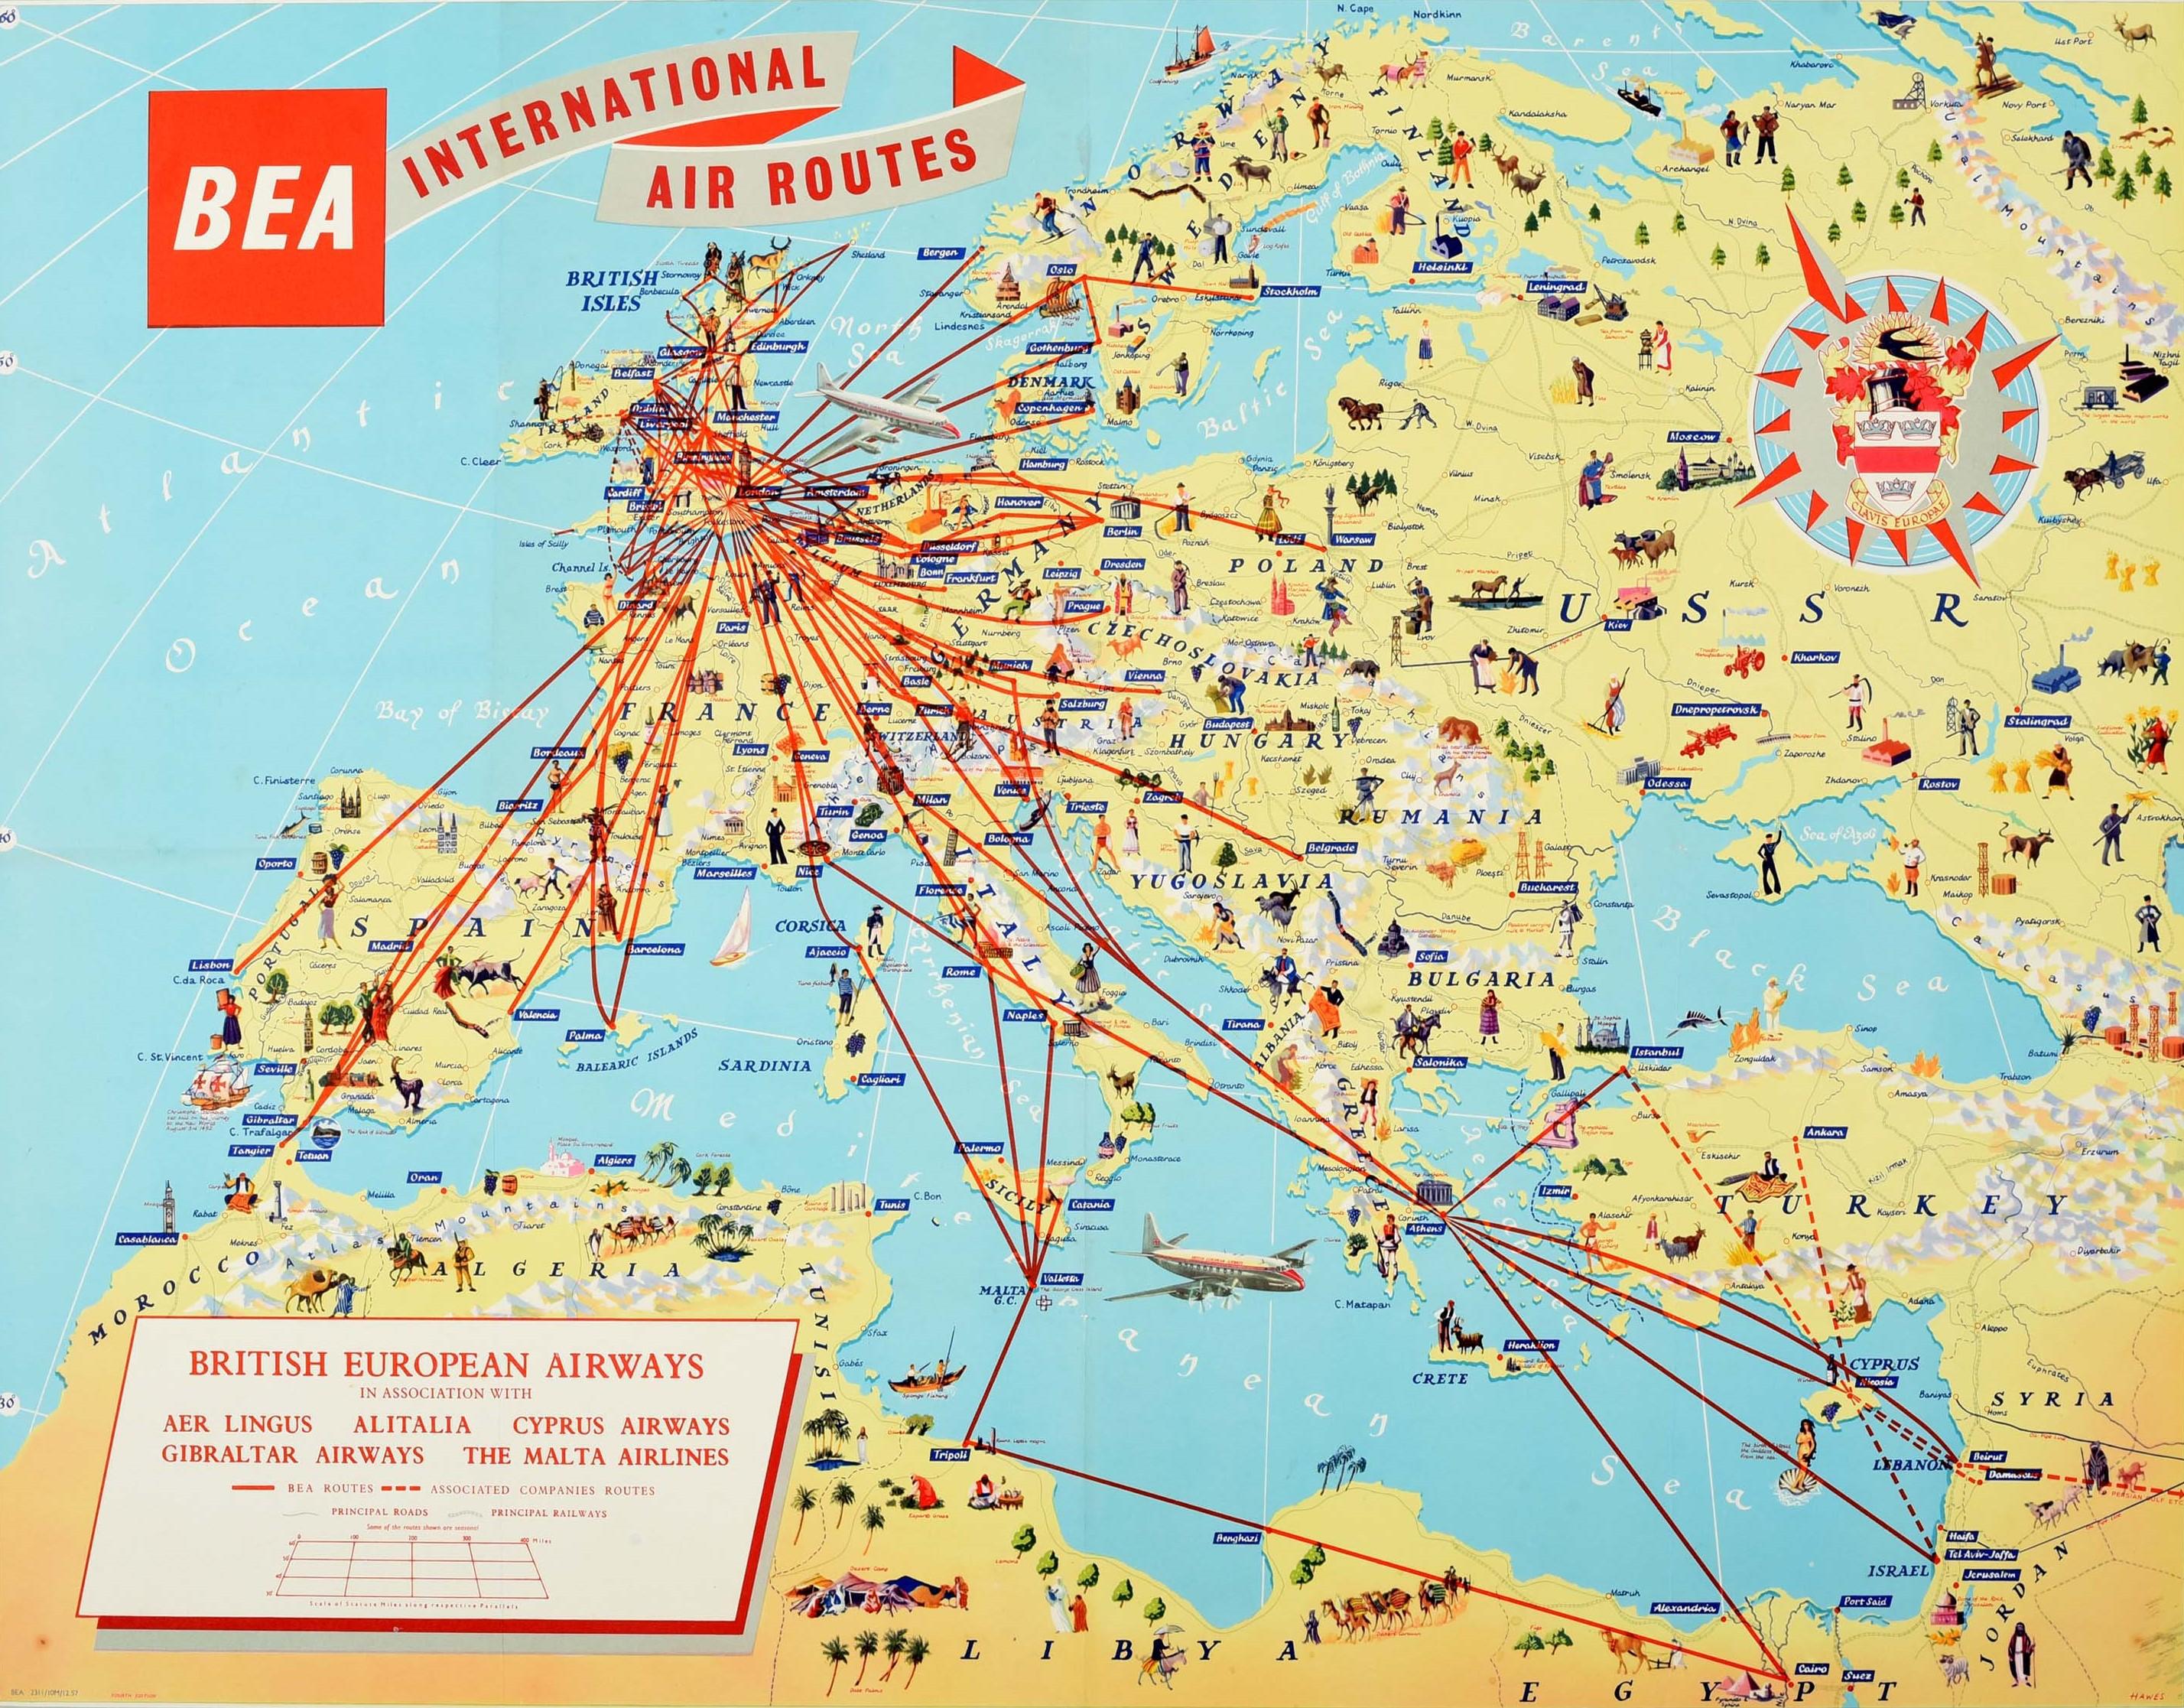 Original vintage travel advertising poster for BEA British European Airways International Air Routes featuring an illustrated map showing the airline route lines and associated links with Aer Lingus Alitalia Cyprus Airways Gibraltar Airways and The